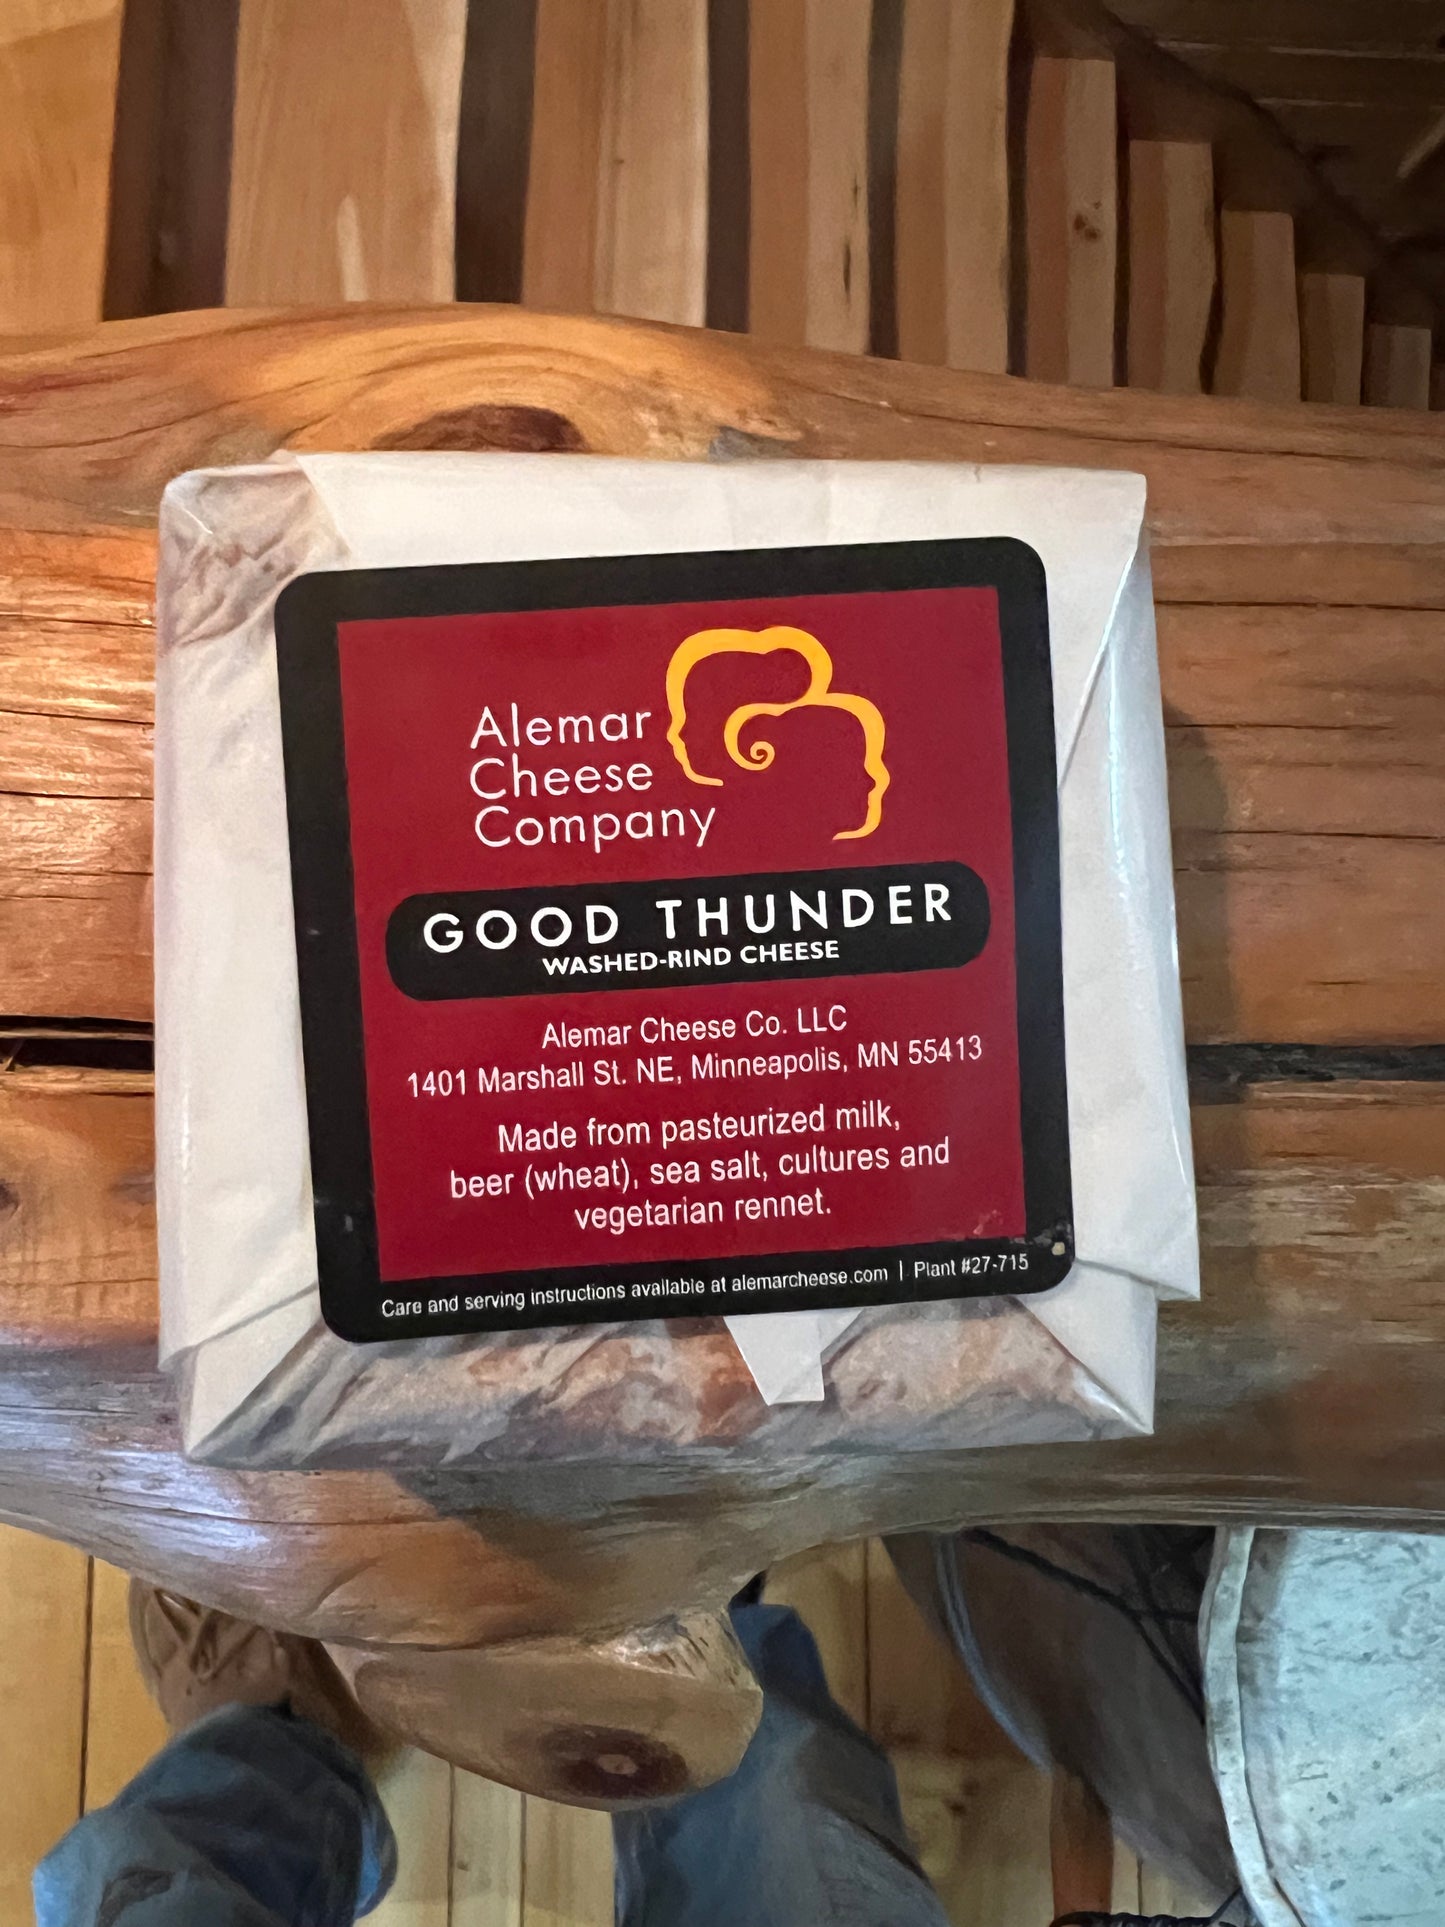 Package of Good Thunder cheese from Alemar Cheese Company